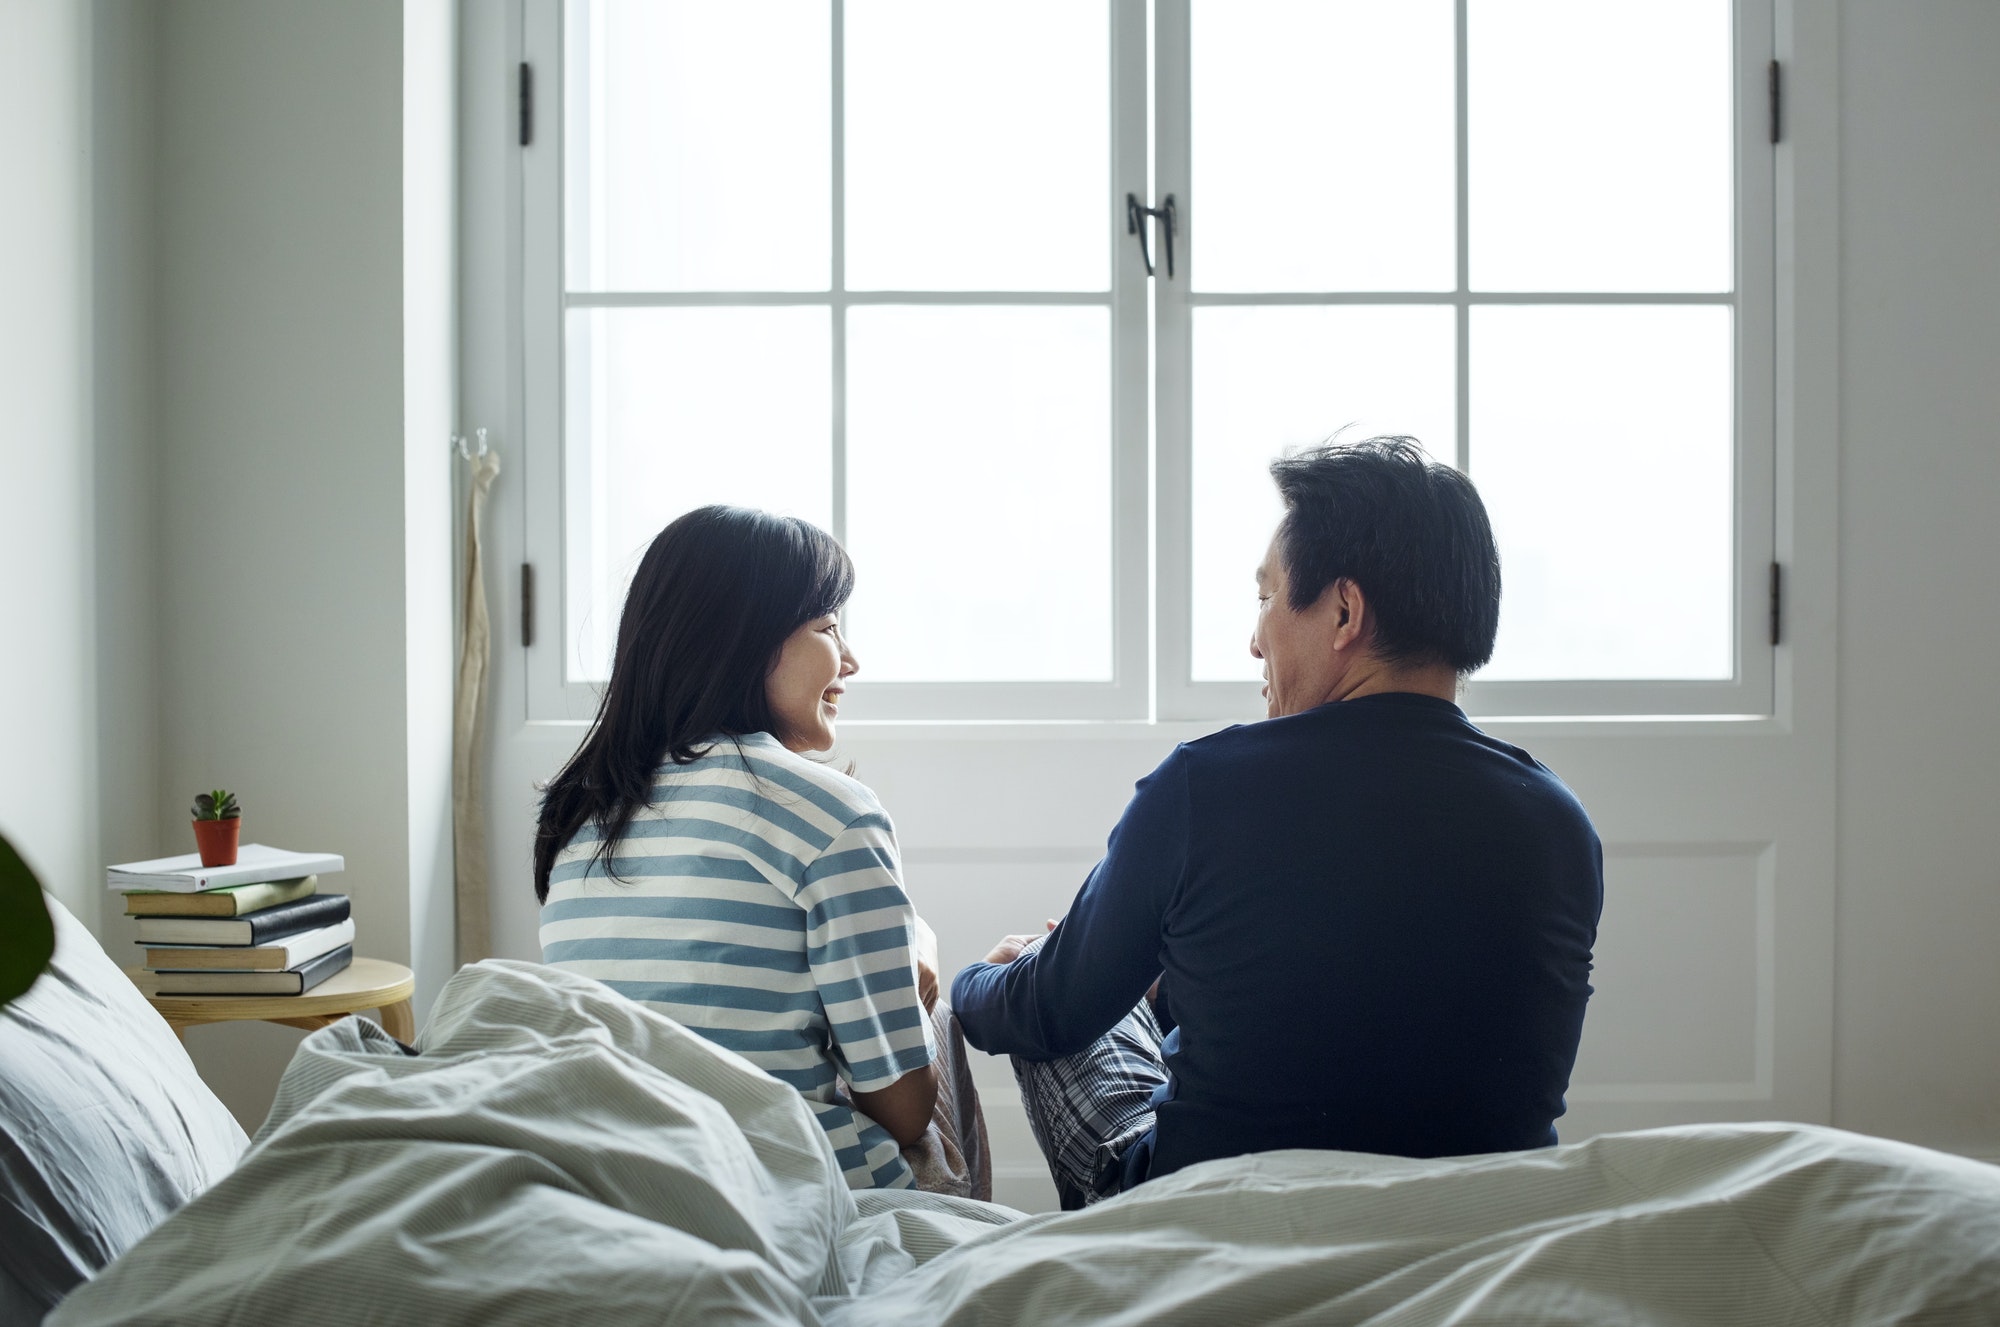 Asian couple talking together in bed